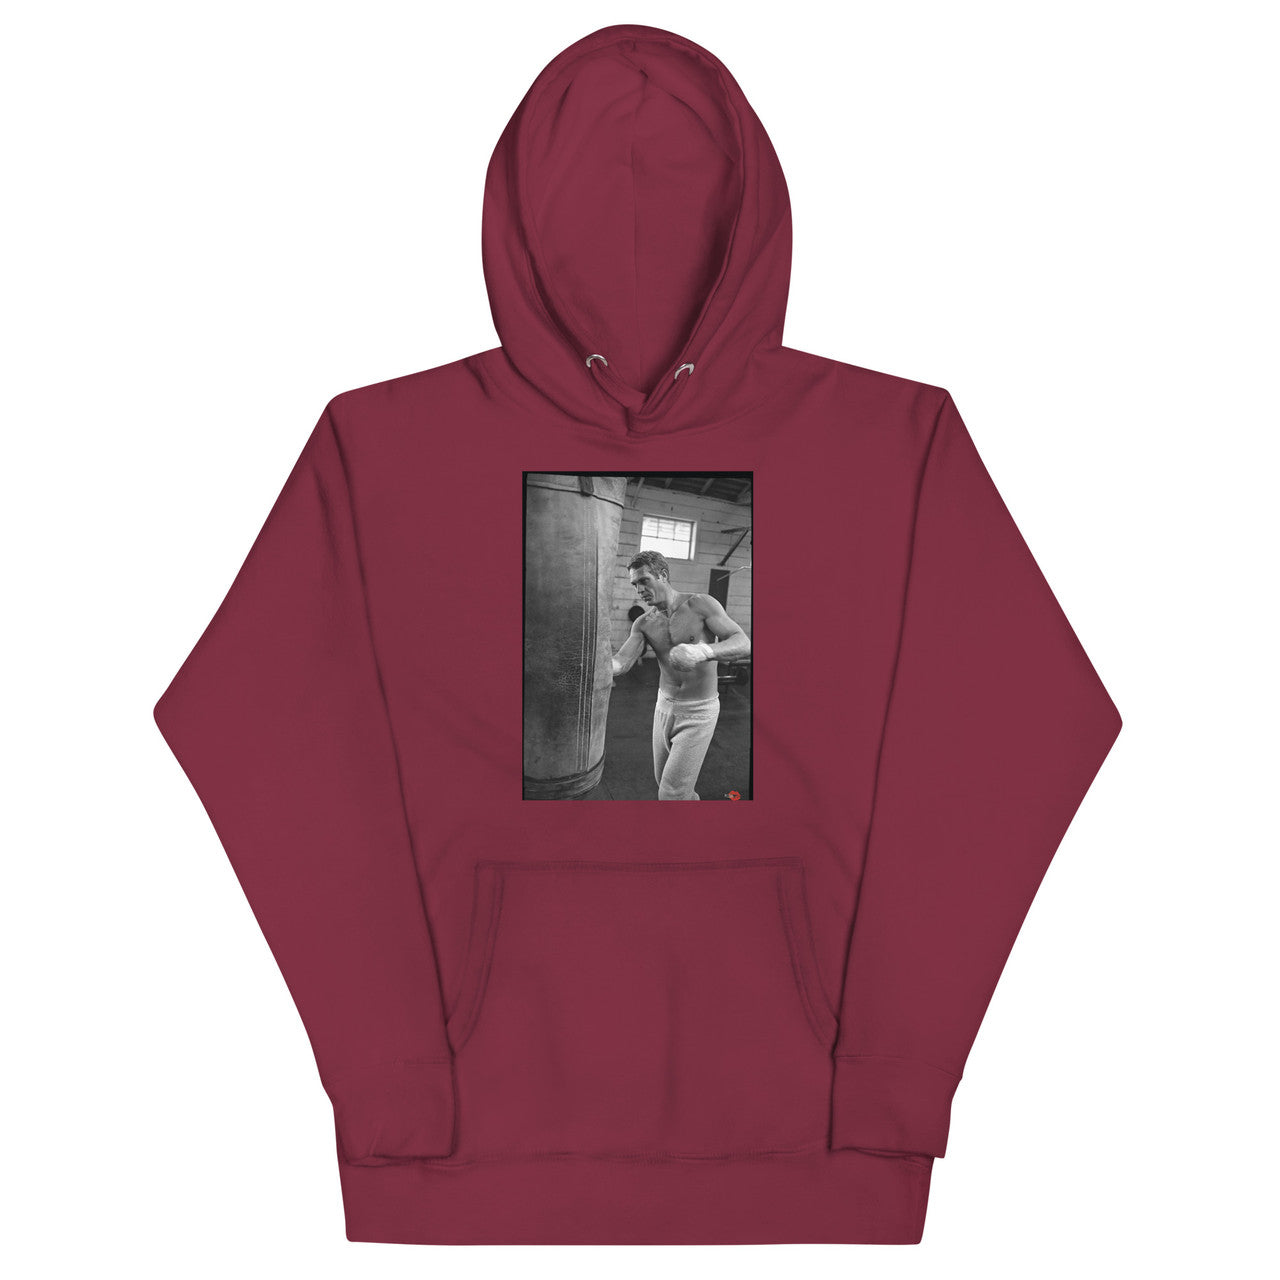 Steve McQueen Boxing Unisex Hoodie - Actor Boxer - Retro Hollywood Image